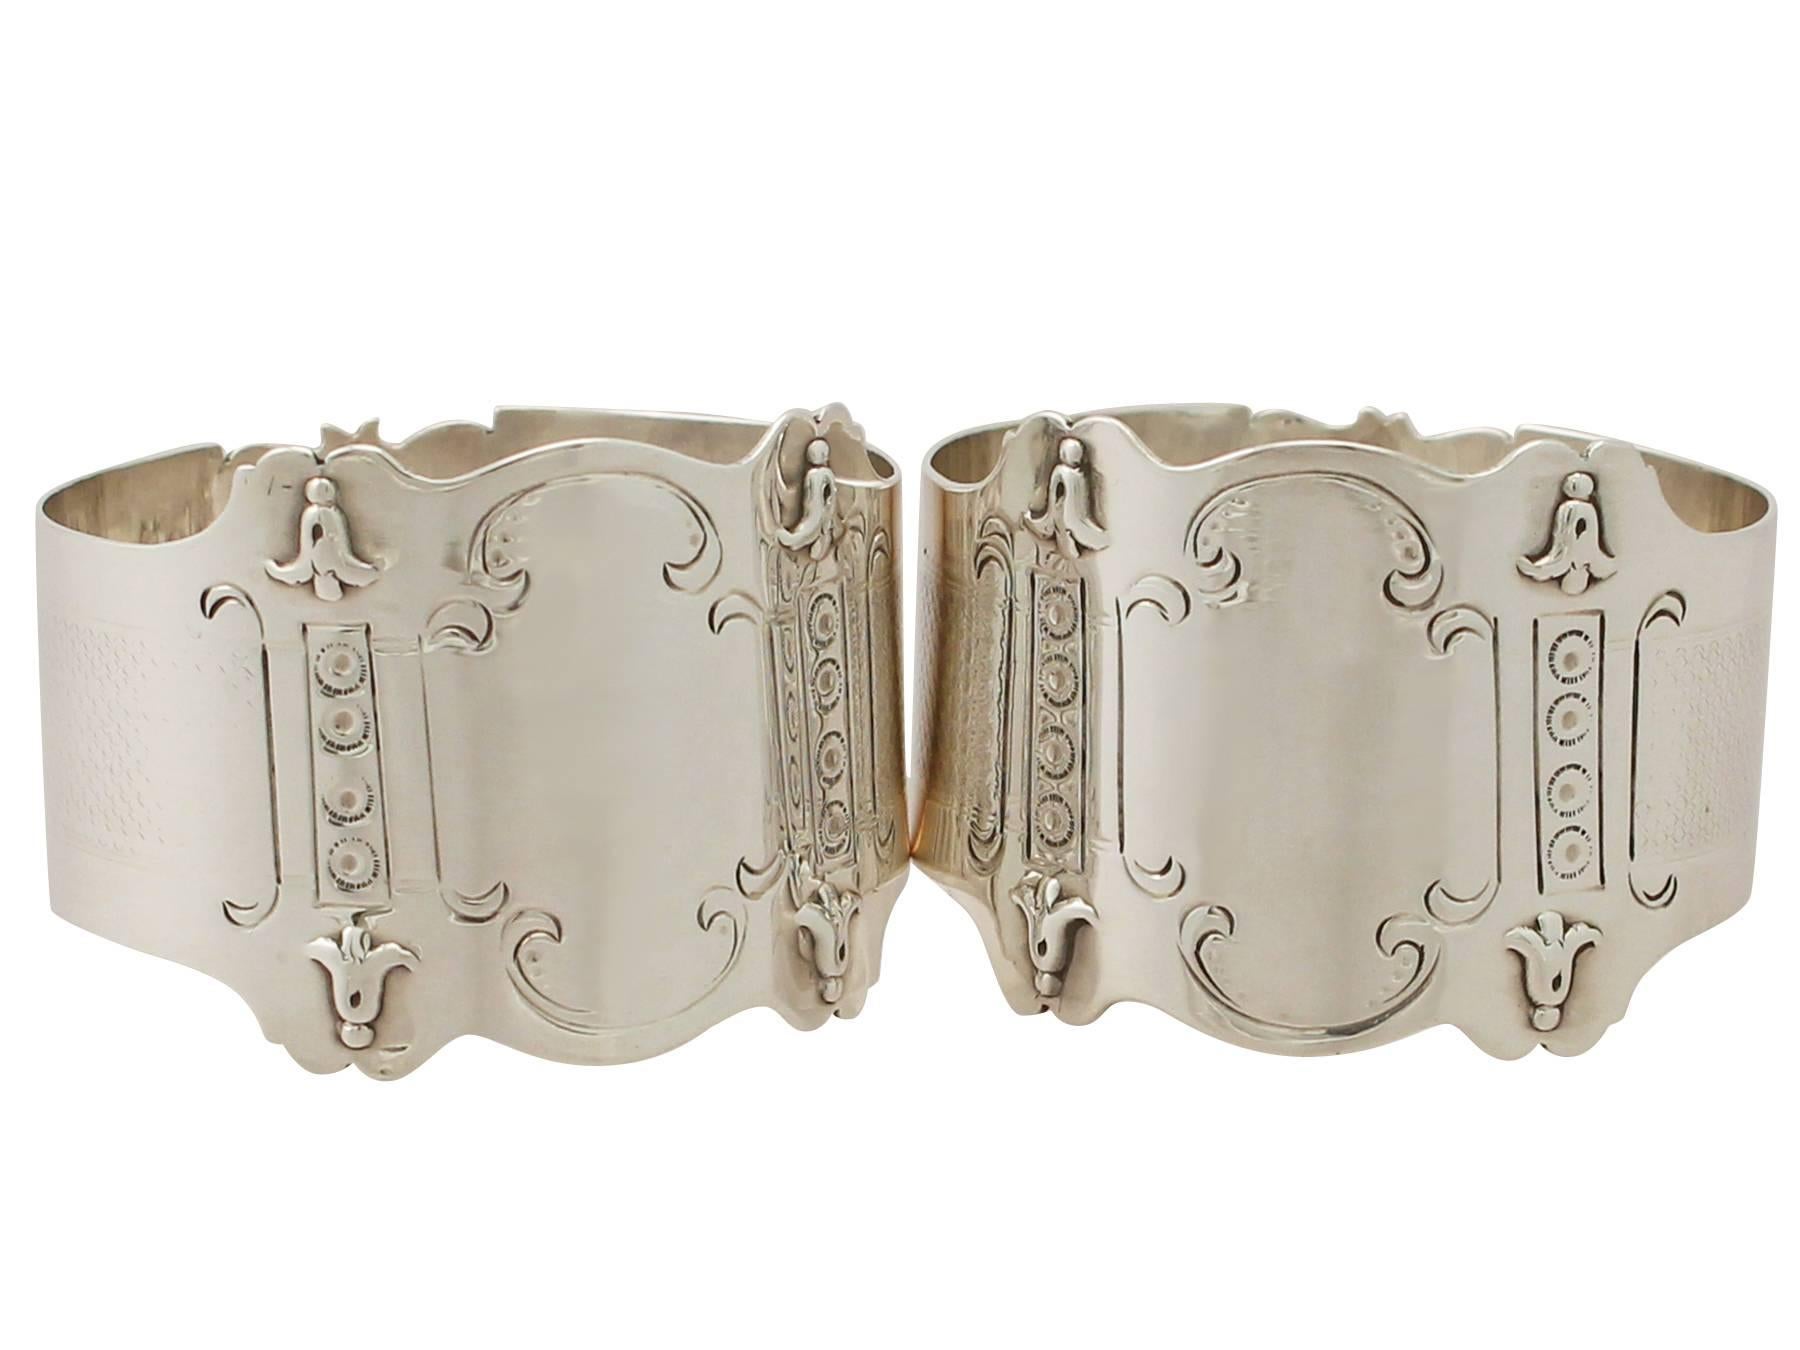 A fine and impressive pair of antique Edwardian English sterling silver napkin rings in the Art Nouveau style - boxed; part of our dining silverware collection.

These fine antique Edwardian sterling silver napkin rings have a circular cylindrical